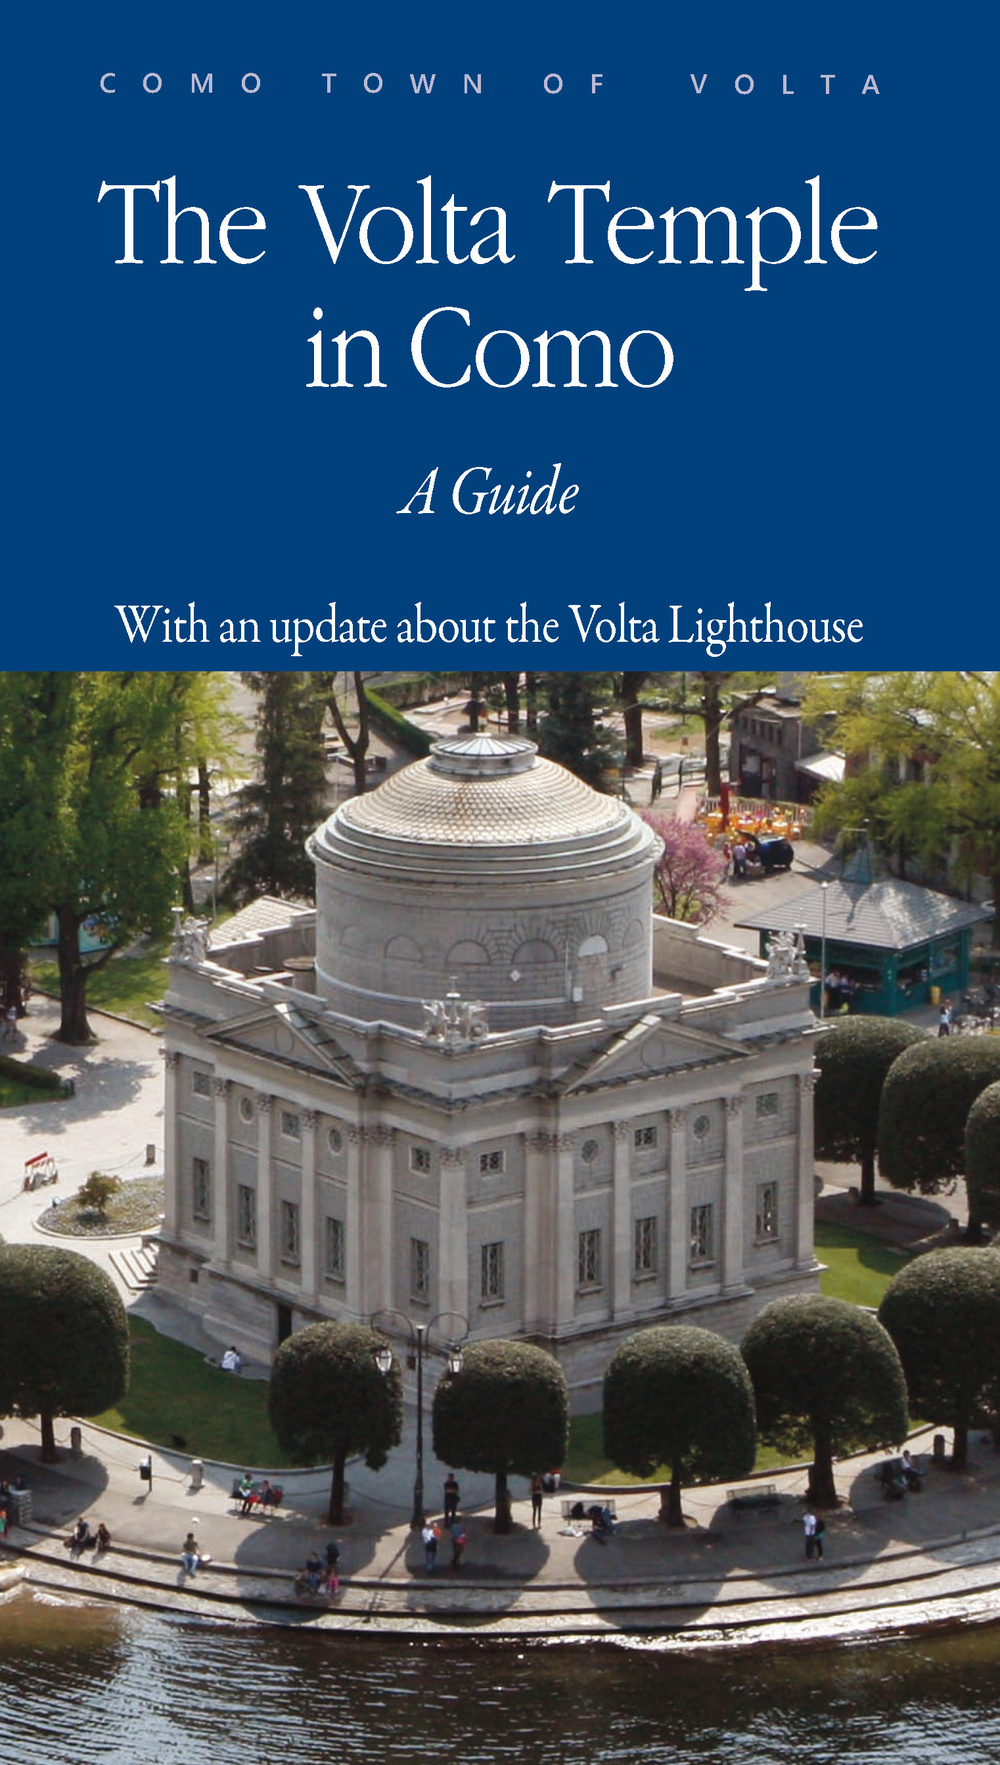 The Volta temple in Como. A guide. With an updatebout the Volta lighthouse